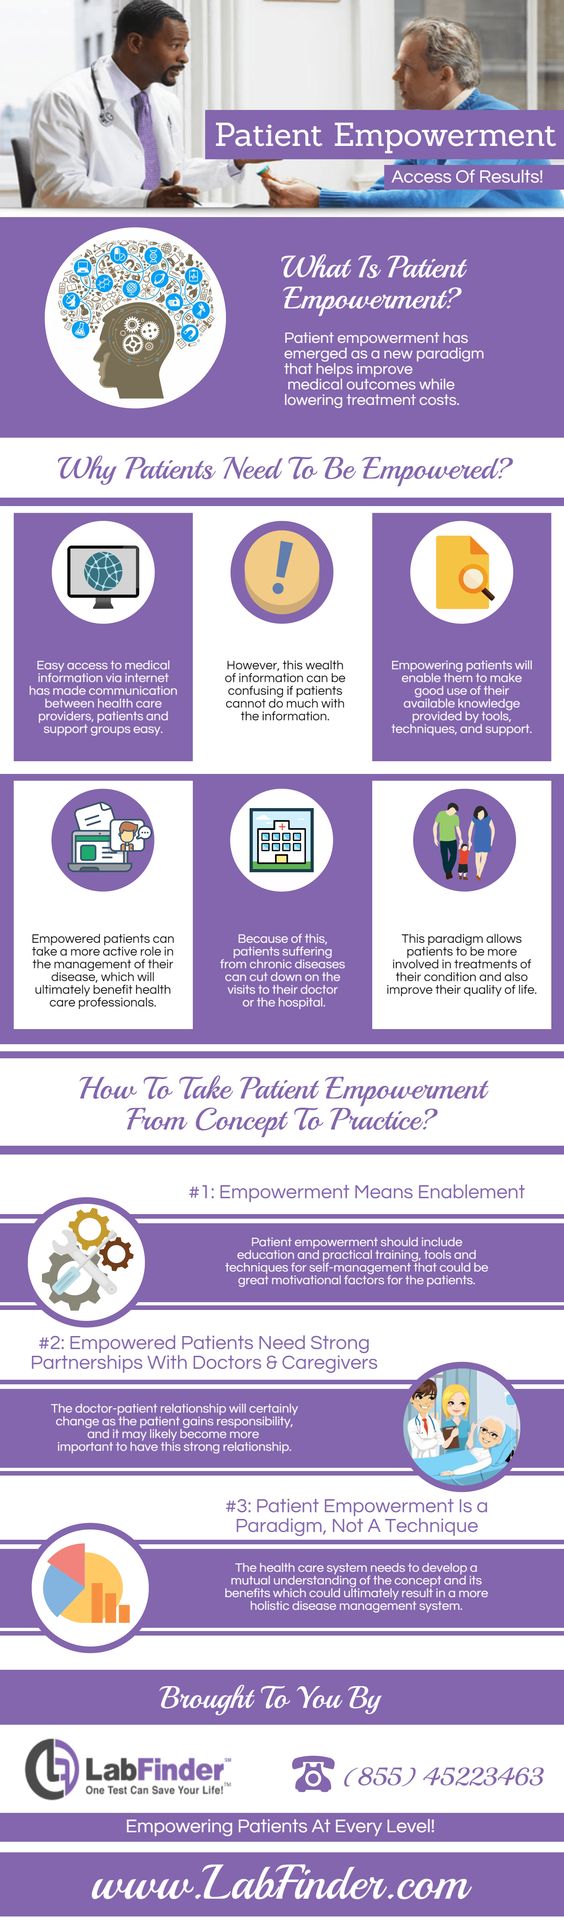 Patient Empowerment Infographic | The Healthcare Marketer.